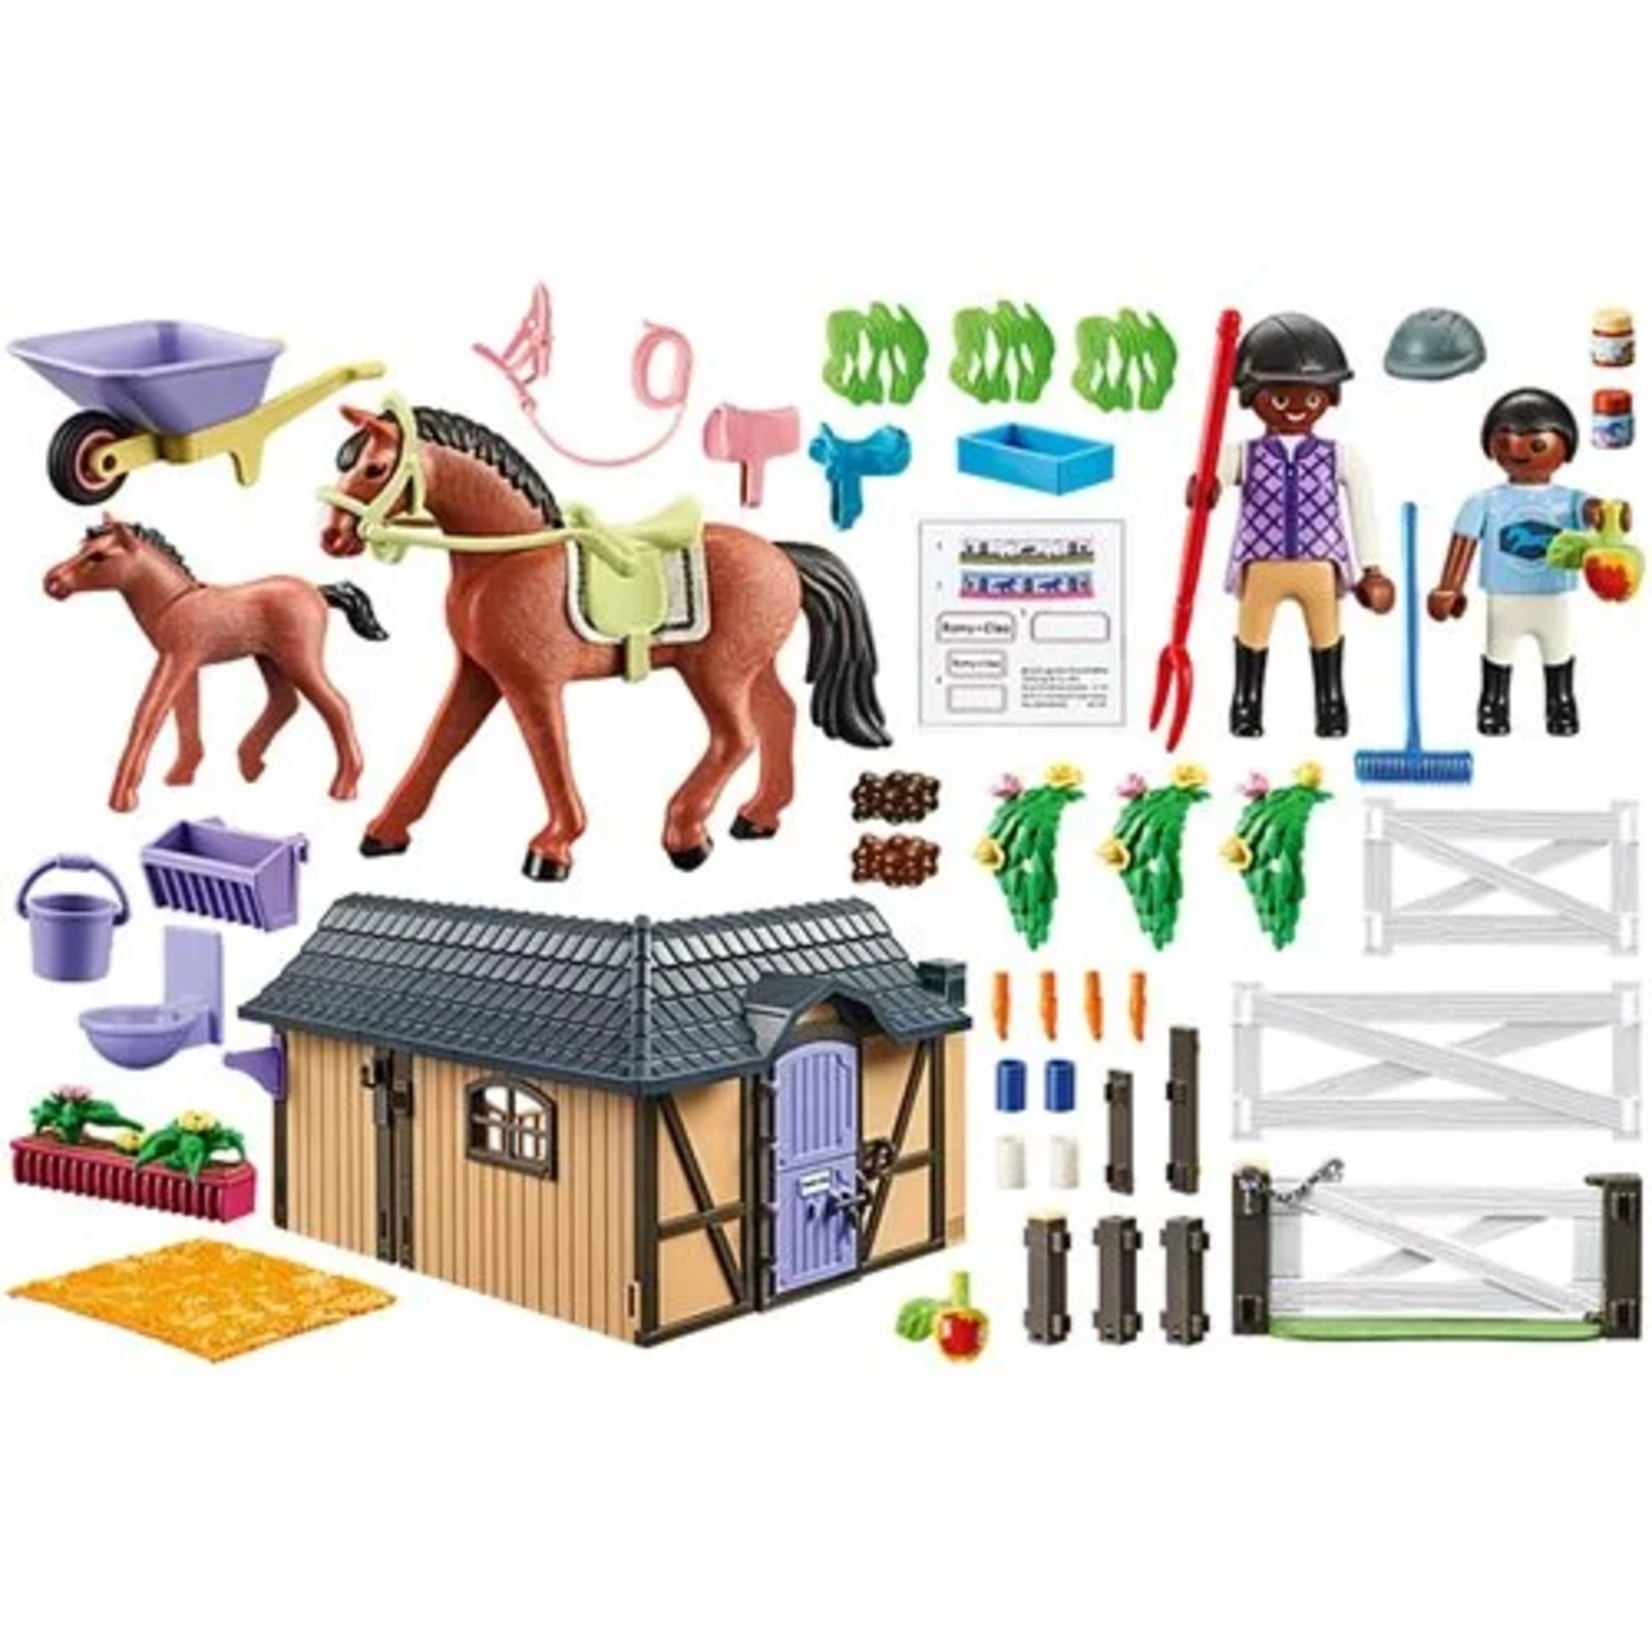 Playmobil Riding Stable World of Horses - Playmobil 71238